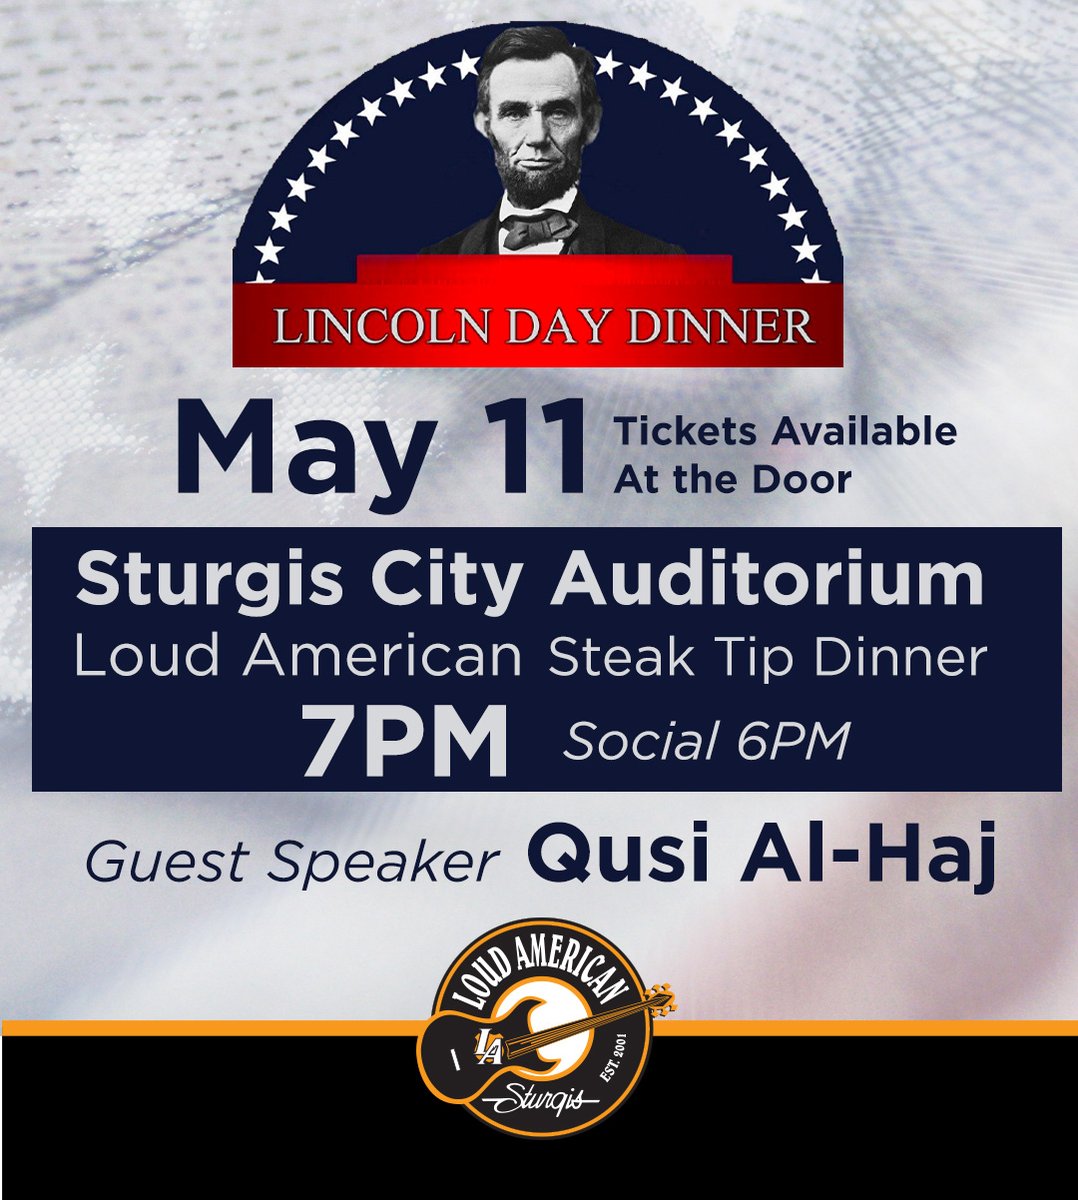 On May 11th, we will be catering the Lincoln Day Dinner at the Sturgis City Auditorium! 
Tickets are available at the door if you're interested in enjoying some steak tips with us! 
-
#loudamerican #steaktips #Blackhills #sturgis